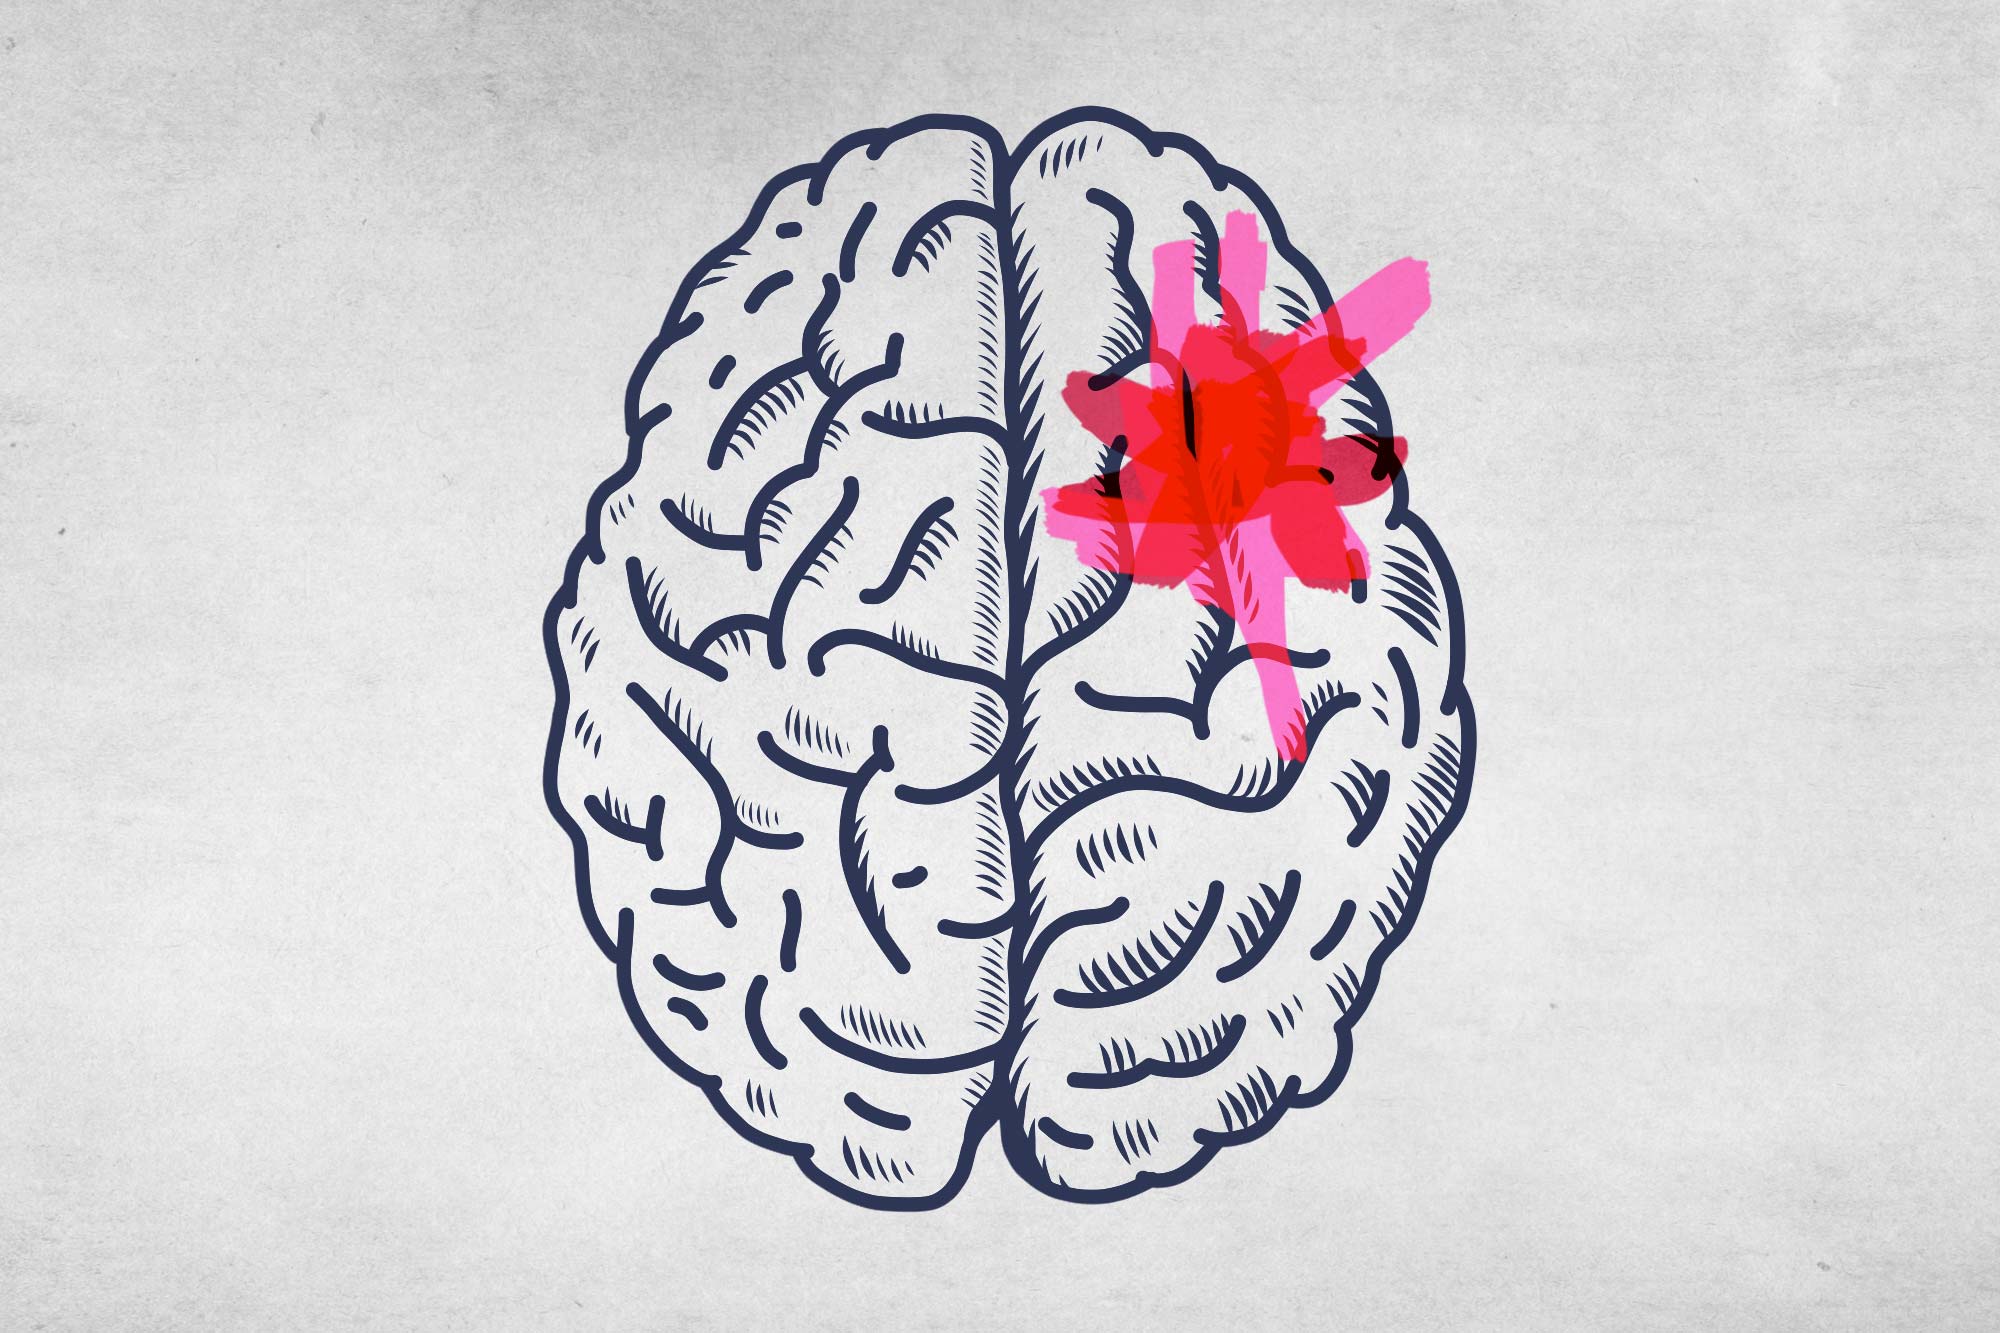 A line drawing of a human brain, with a large pink splotch in the upper right quadrant